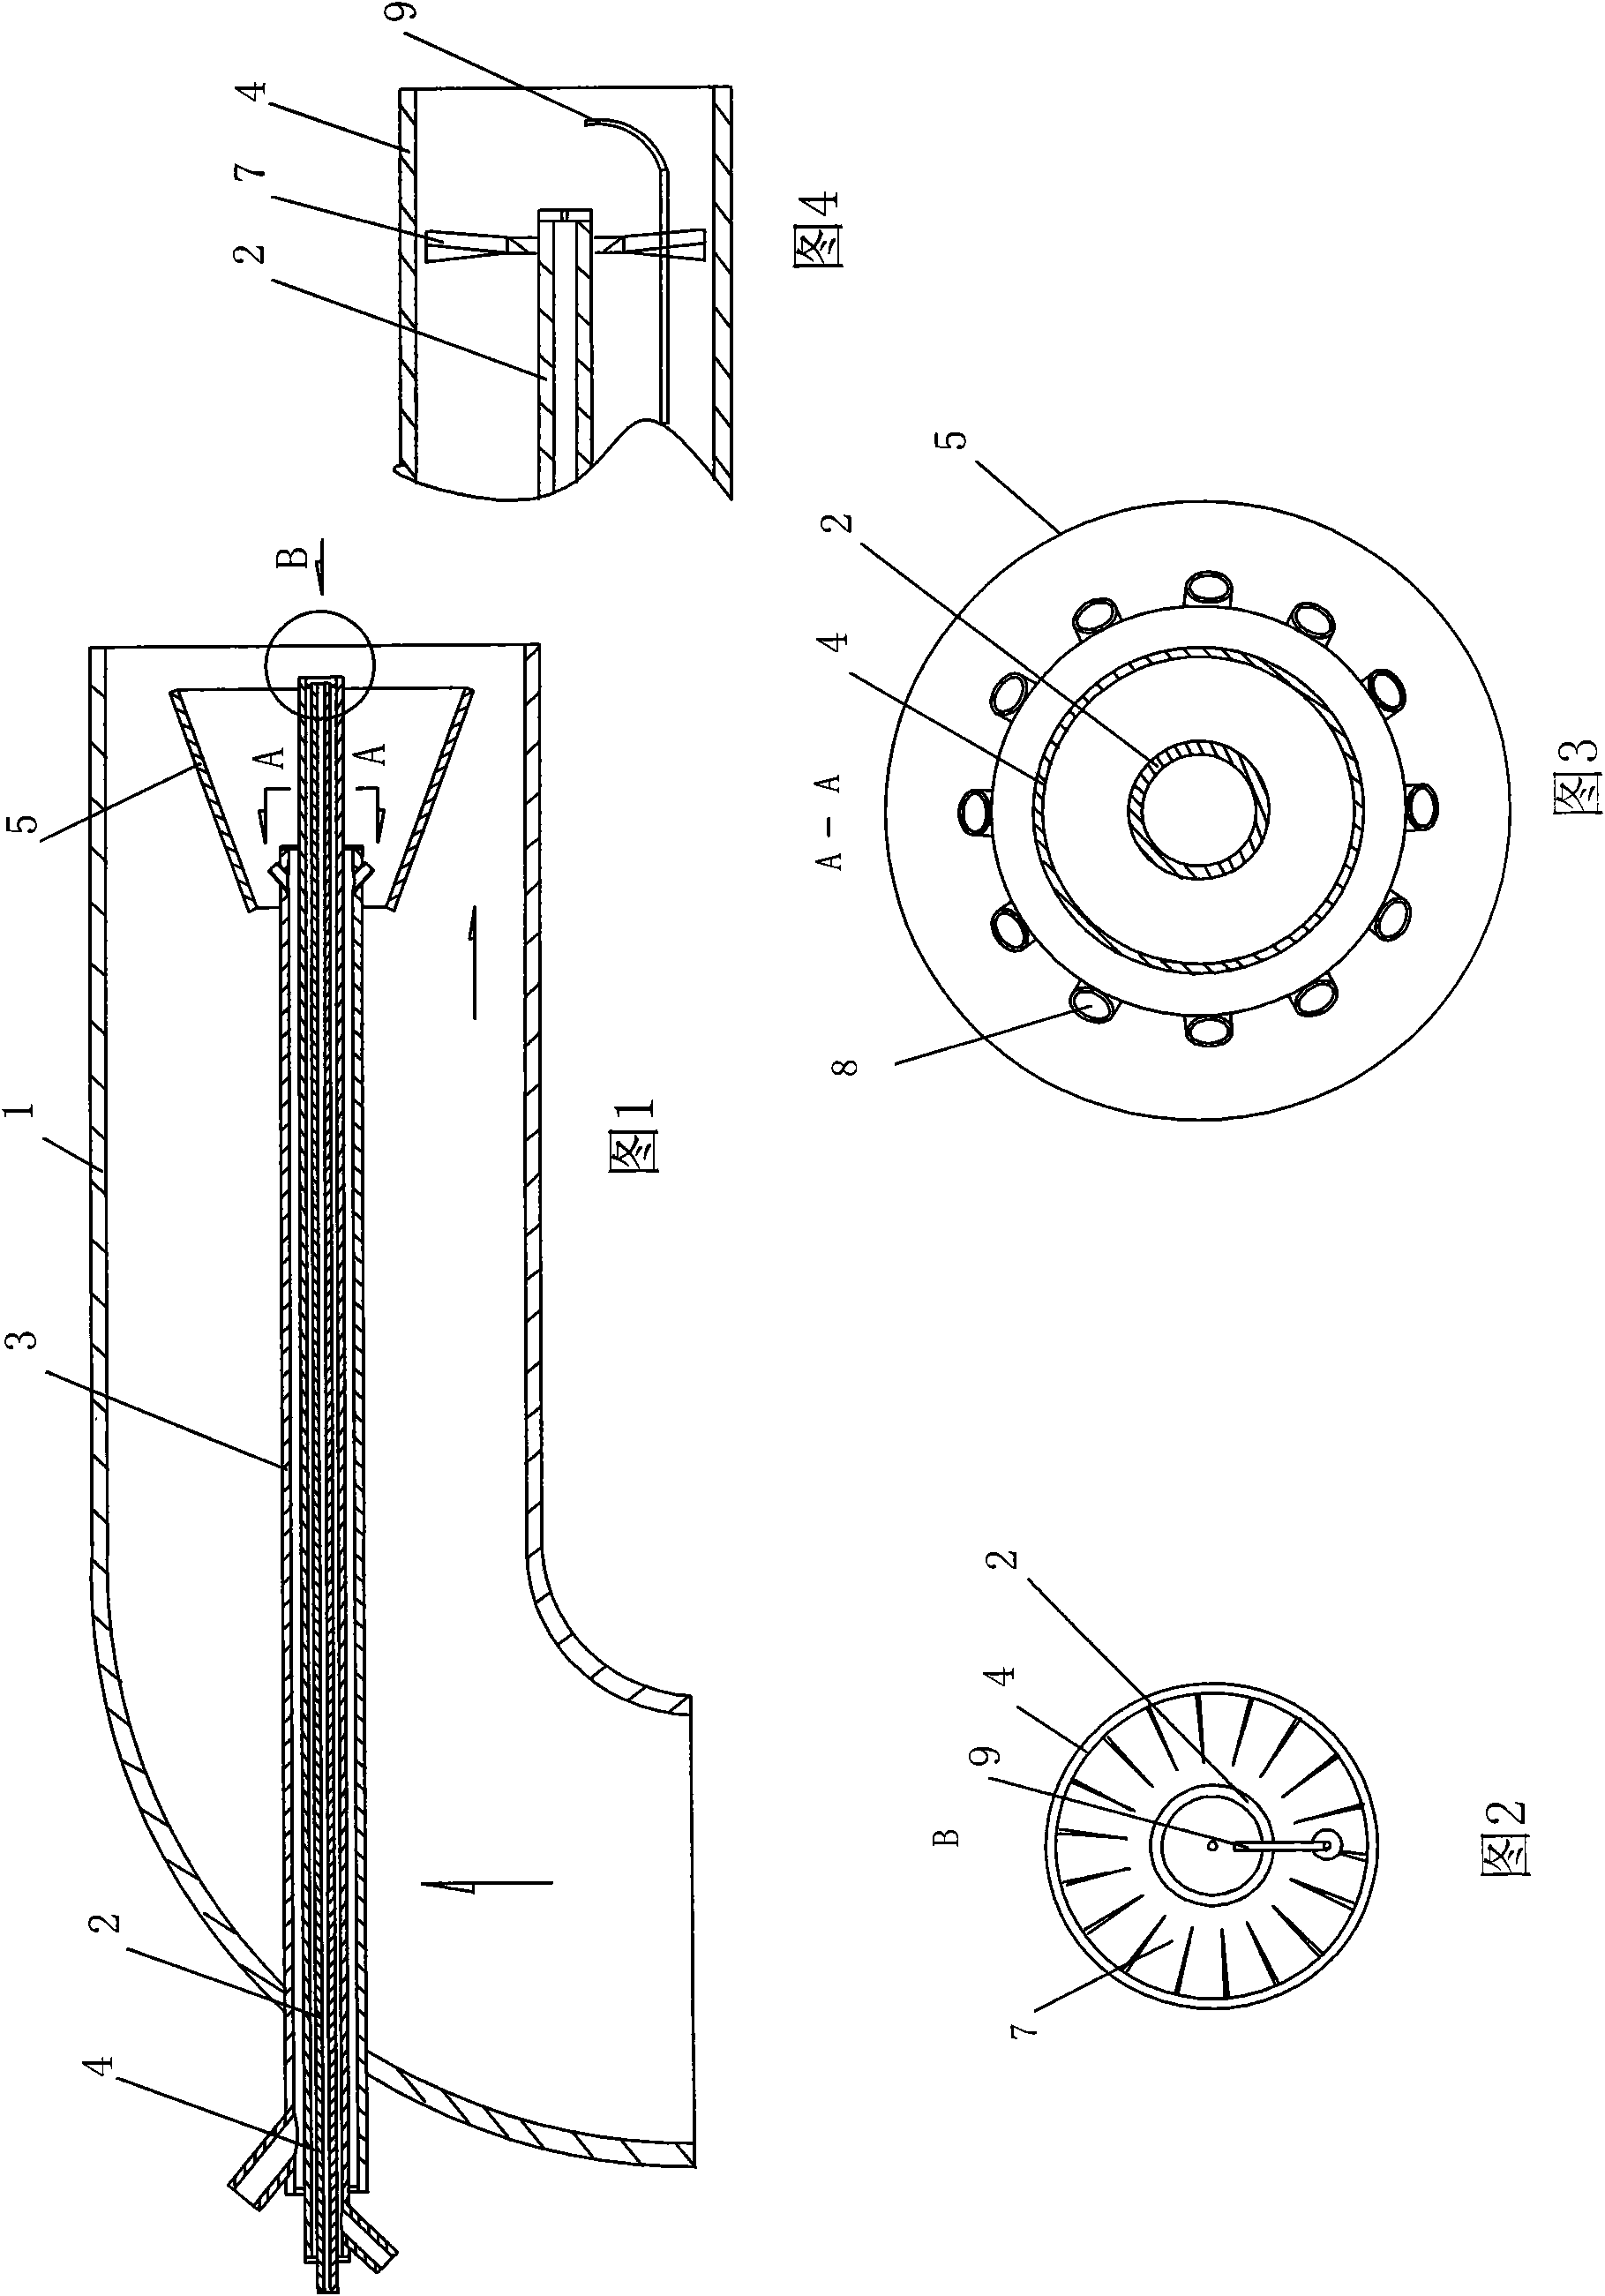 Oxygen-enriched tiny-oil ignition combustion-stabilizing device